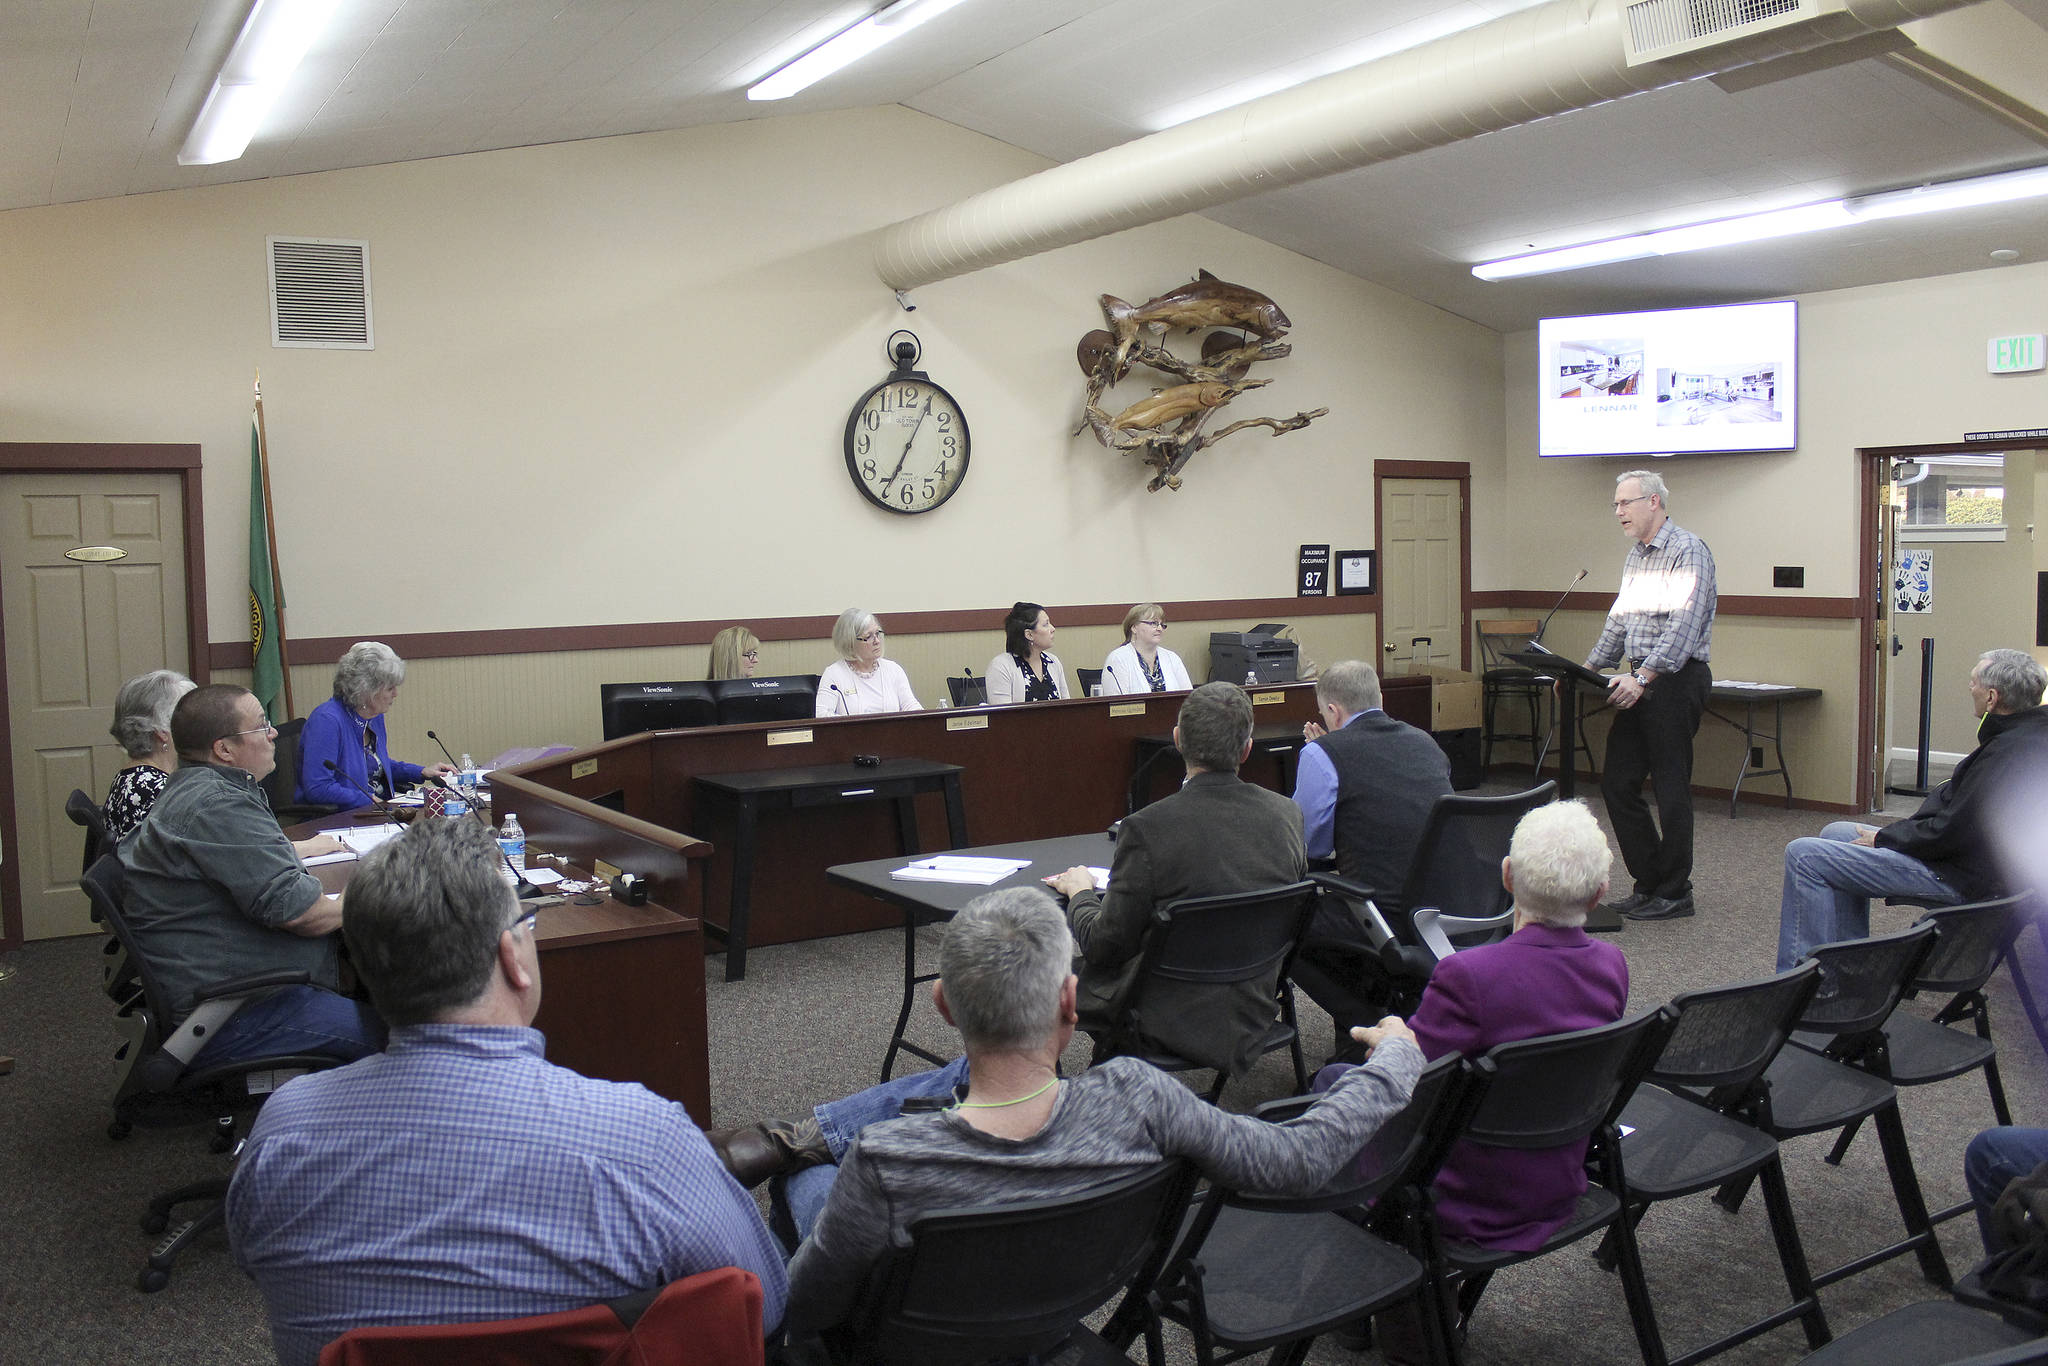 Colin Lund of the developer Oakpointe presented to the Black Diamond City Council last week, letting the council know how the two housing developments in the city are coming along. Lund estimated the first new Black Diamond residents will be moving in soon. Photo by Ray Miller-Still